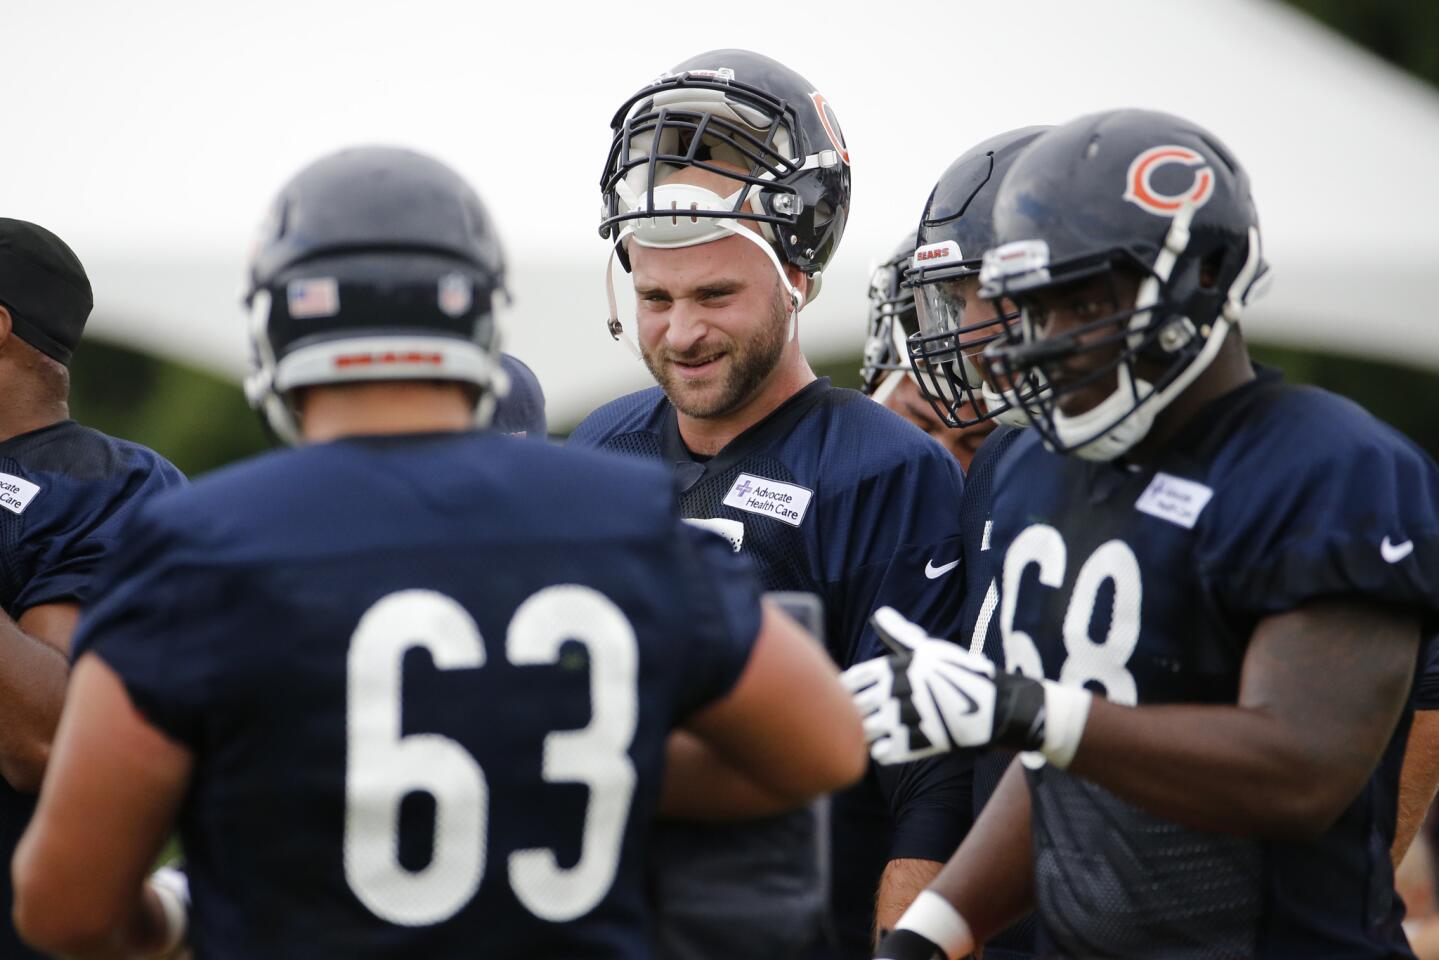 Bears offensive guard Kyle Long with other offensive linemen during the first day of Bears training camp at Olivet Nazarene University in Bourbonnais on Thursday, July 27, 2017.